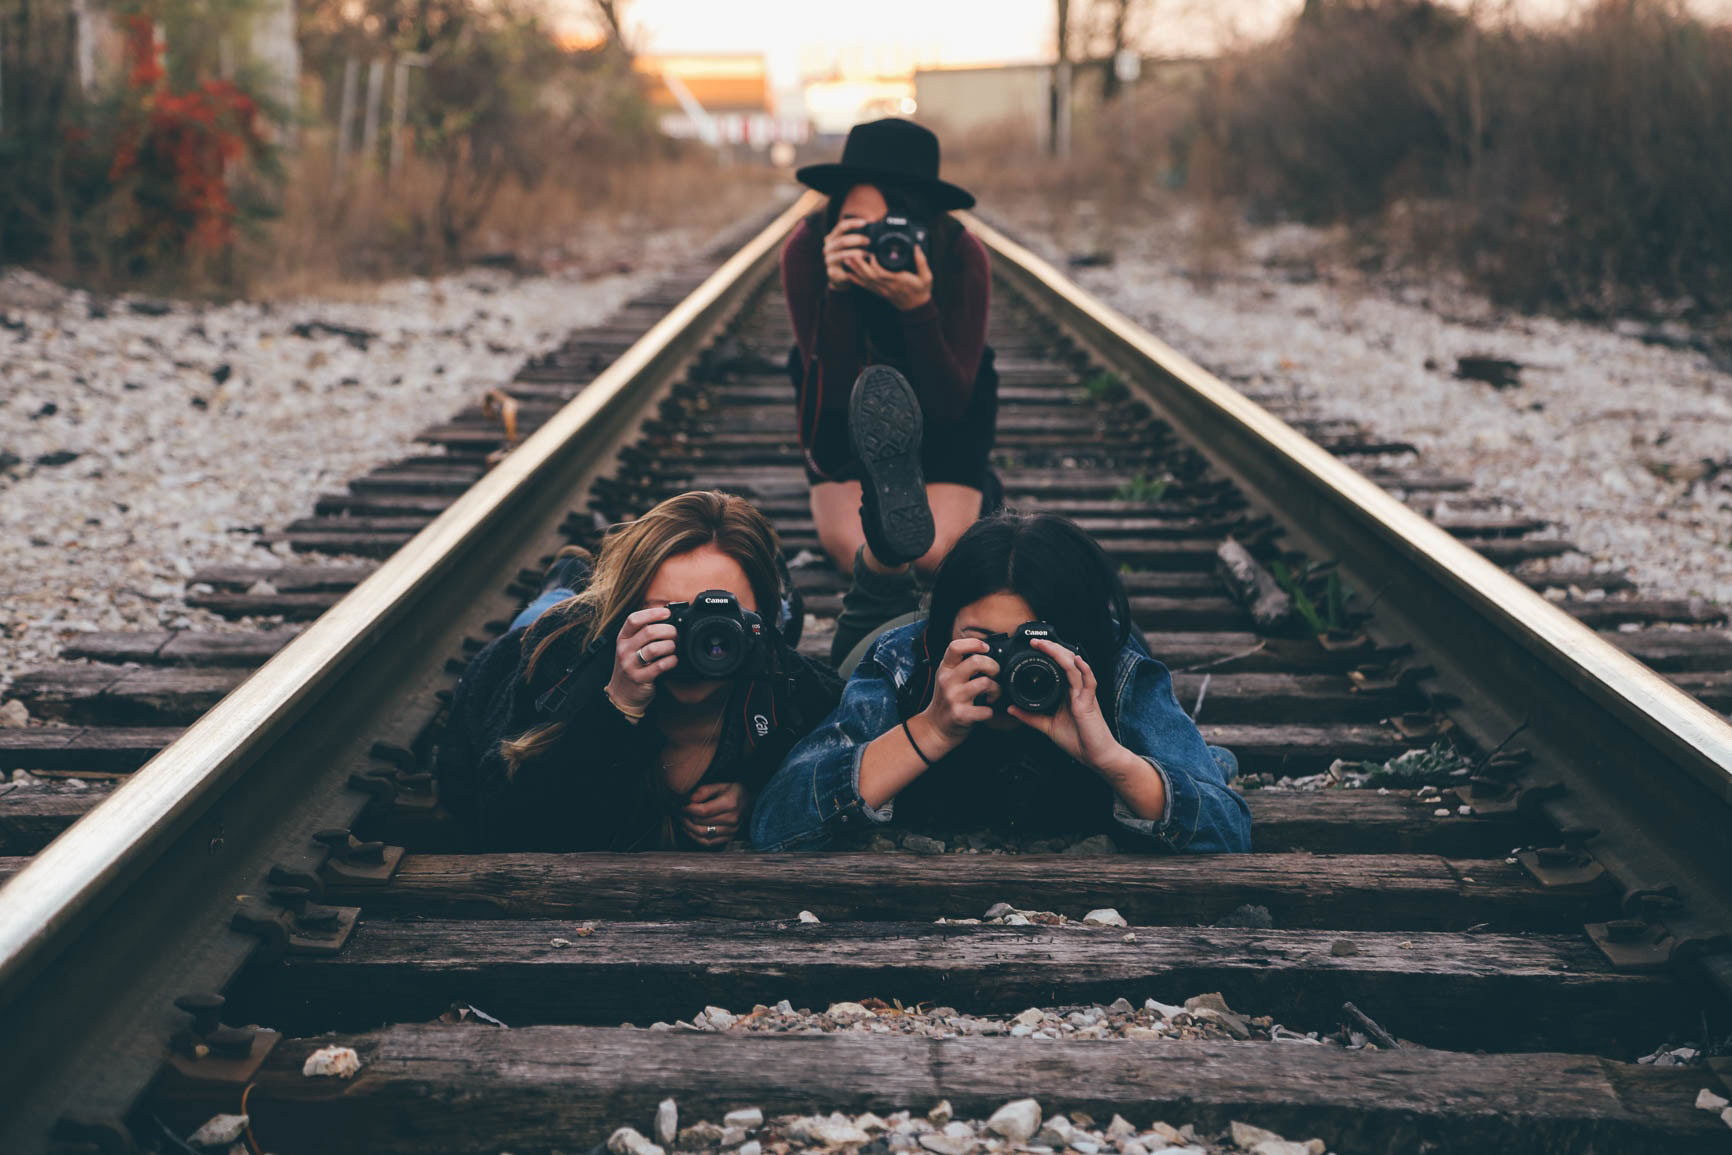 The girls on a train track